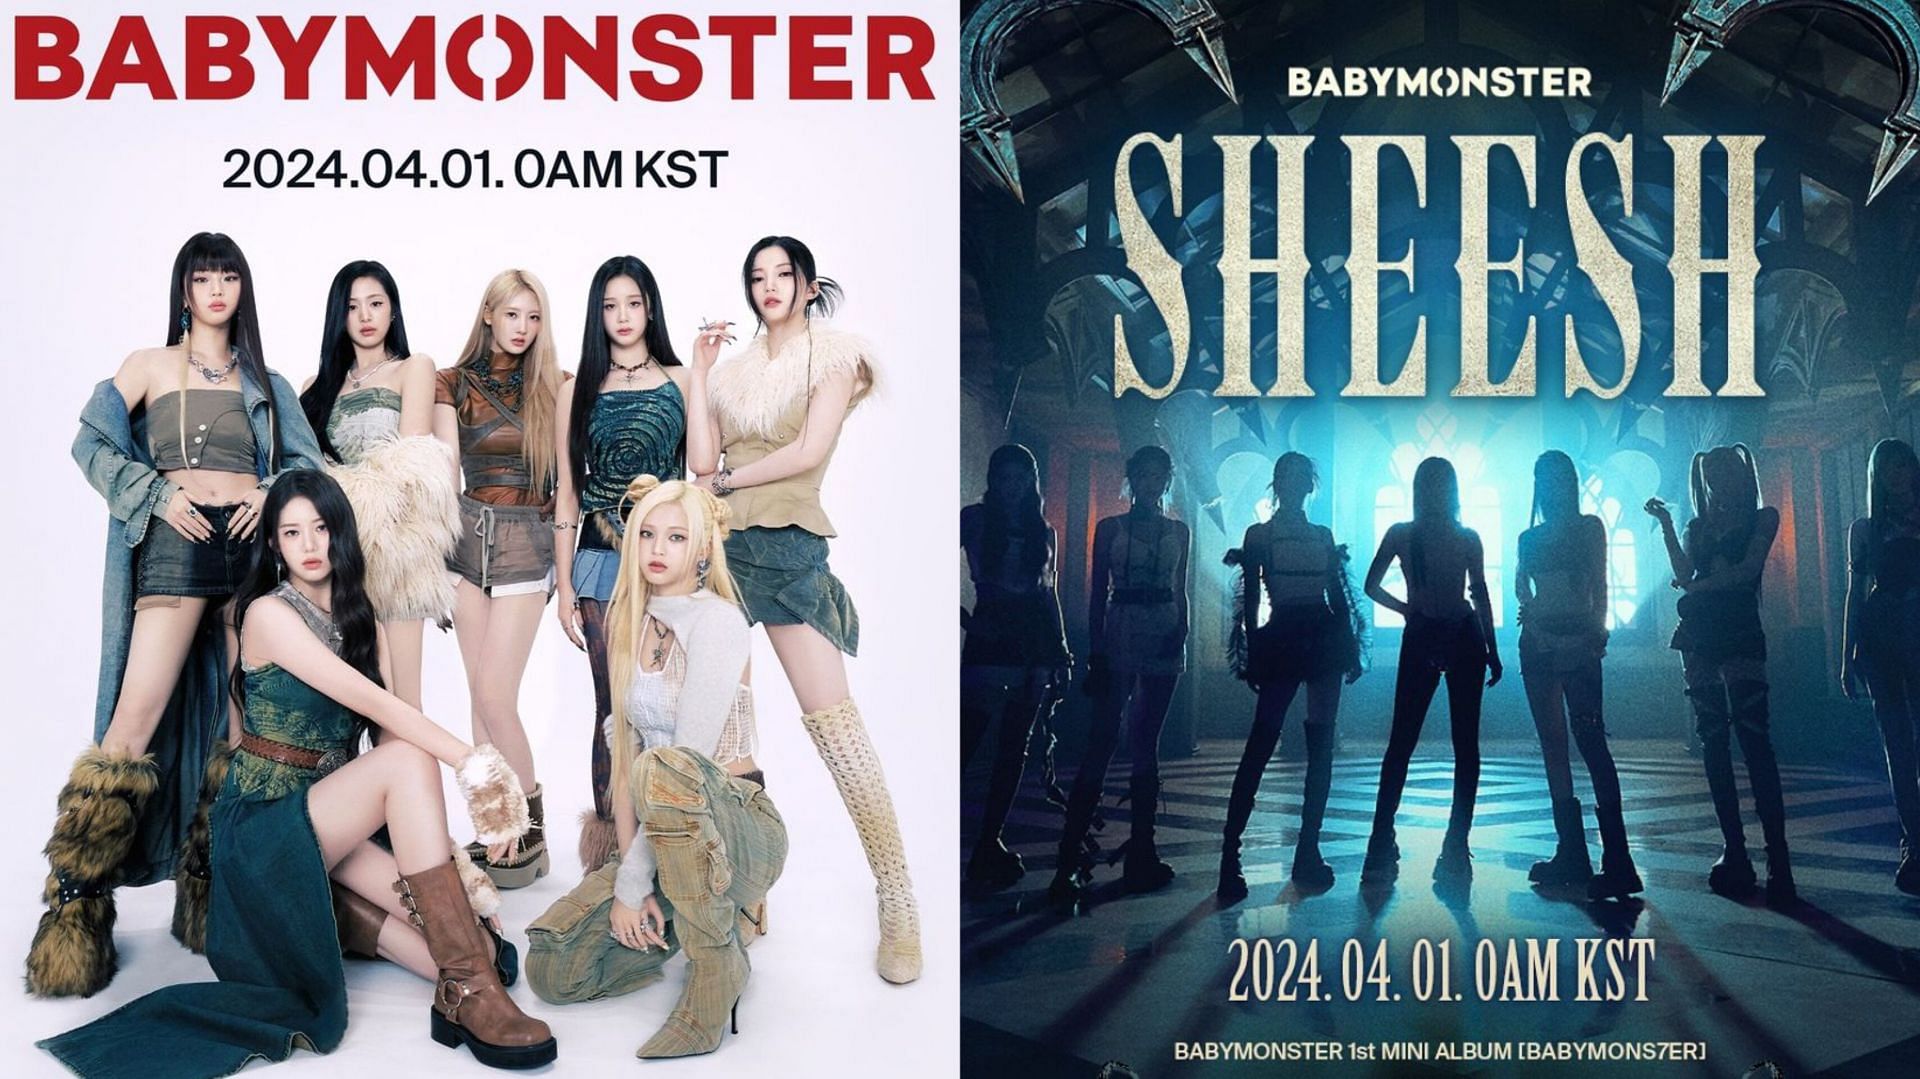 BABYMONSTER unveils &lsquo;SHEESH&rsquo; title poster, official tracklist, fan meet &amp; more for their upcoming mini album 